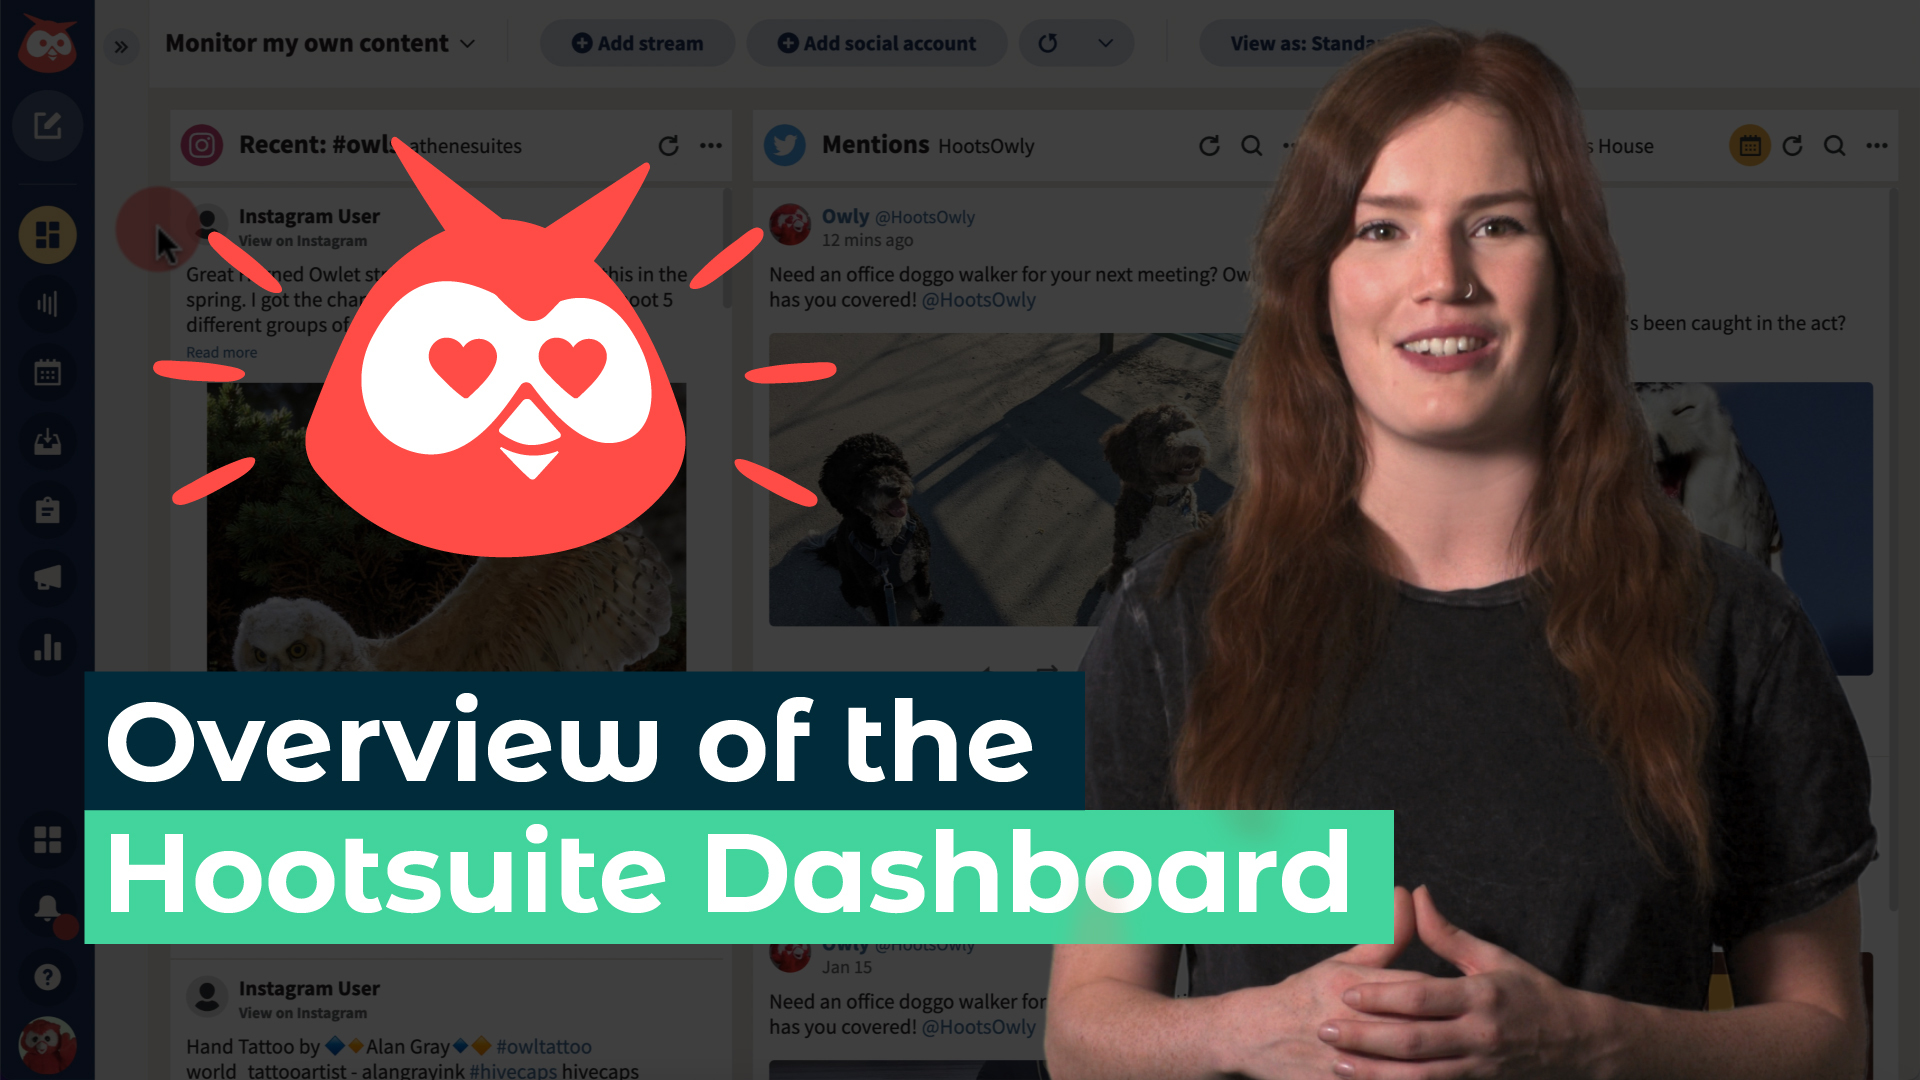 Overview of the Hootsuite dashboard video.